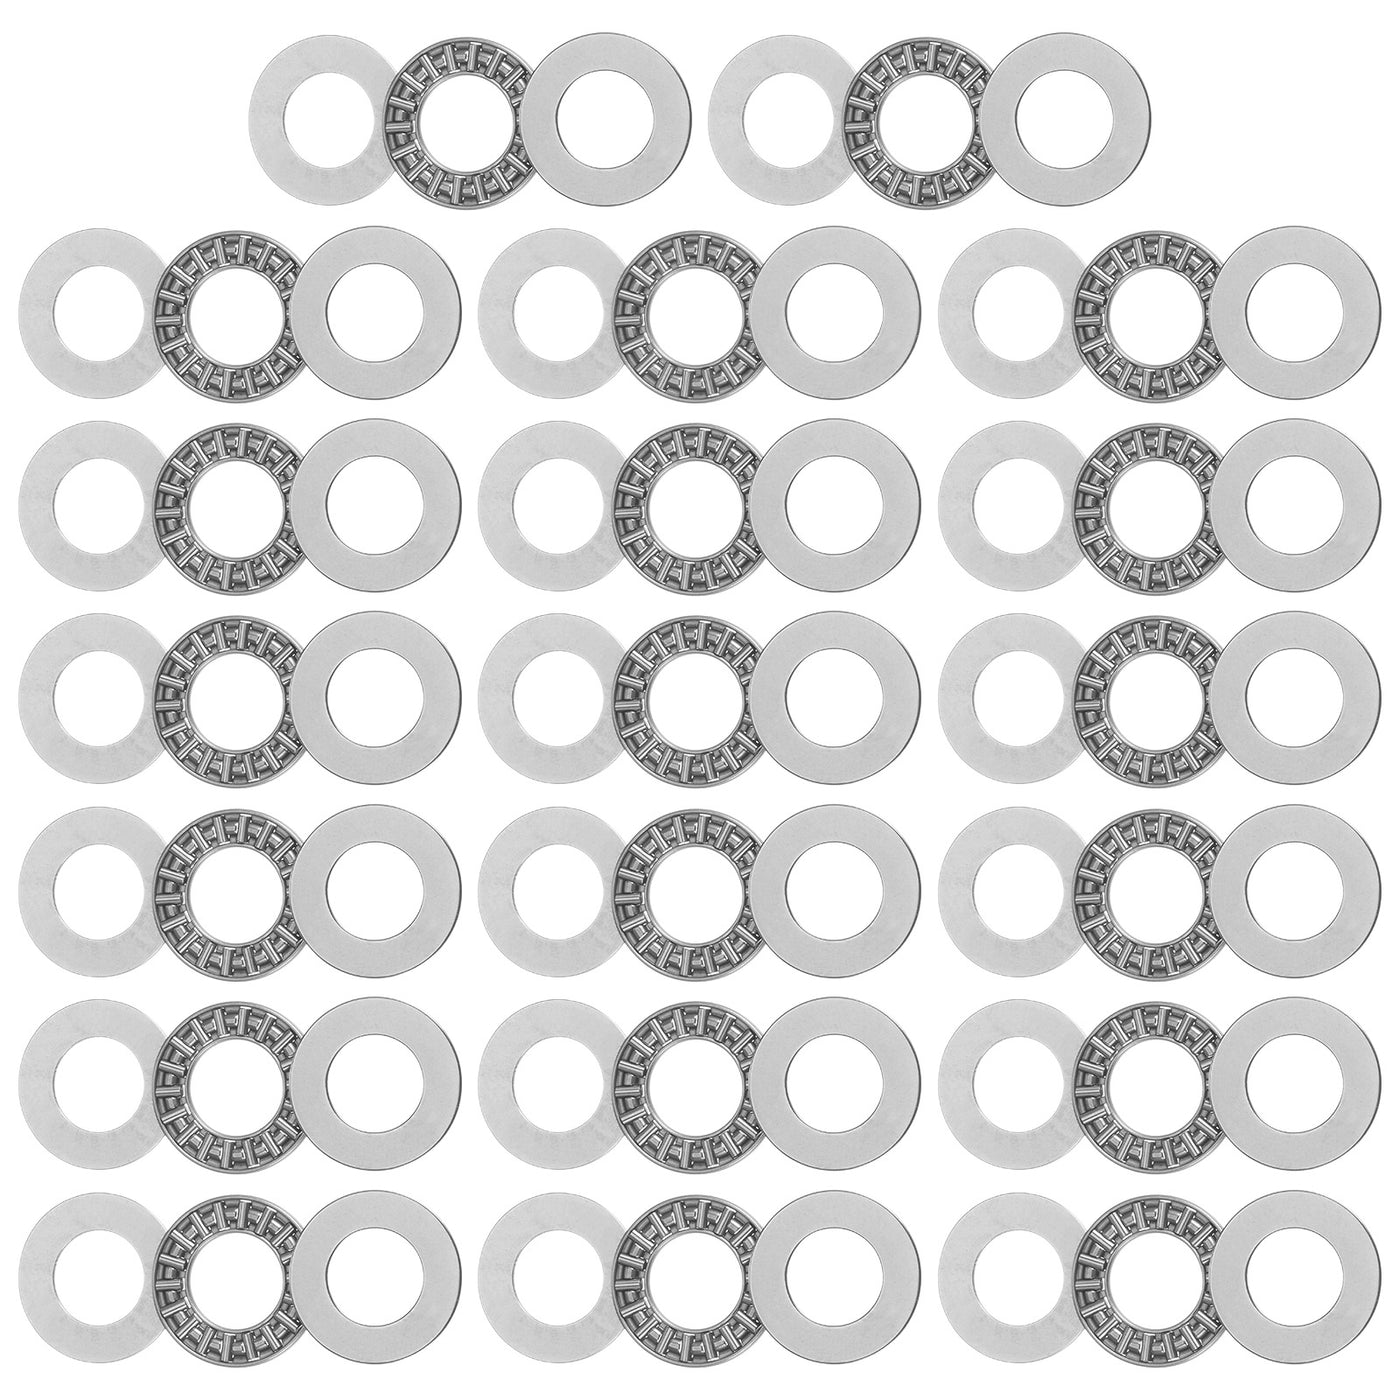 uxcell Uxcell AXK1528 Thrust Needle Roller Bearings 15x28x2mm with AS1528 Washers 20pcs